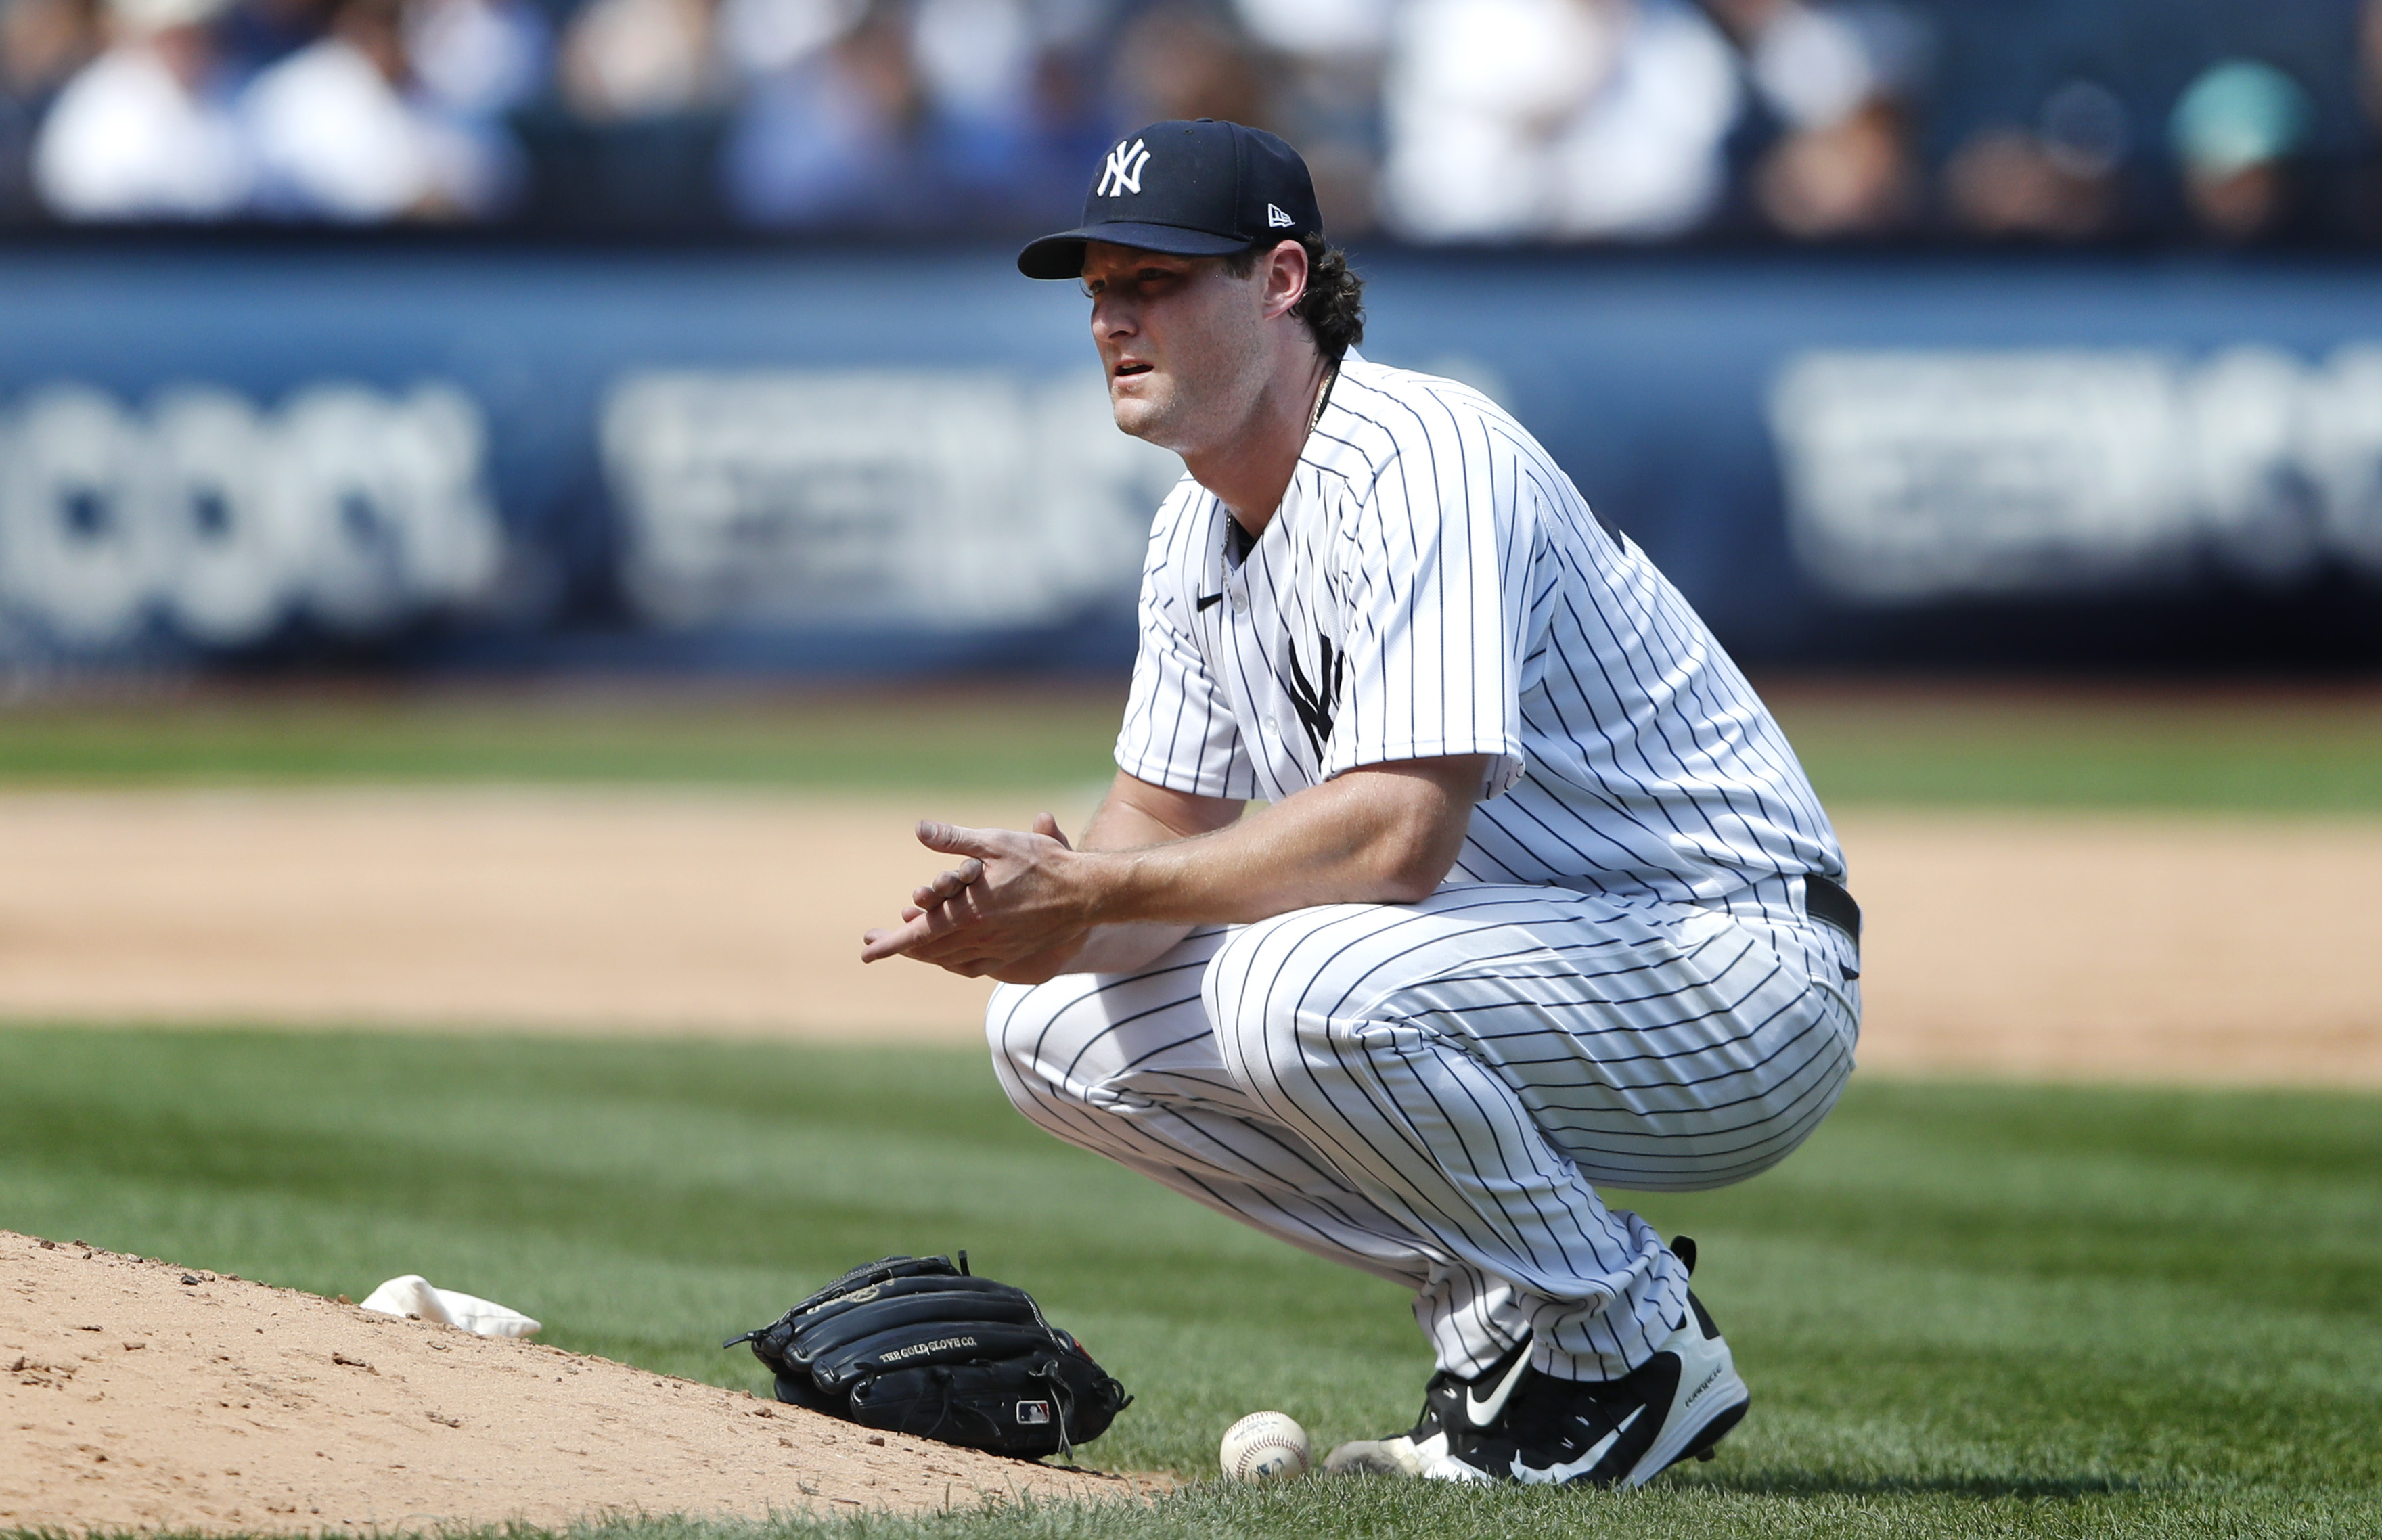 First Time, Lifetime: Yankees' Aaron Boone Was Probably Born to